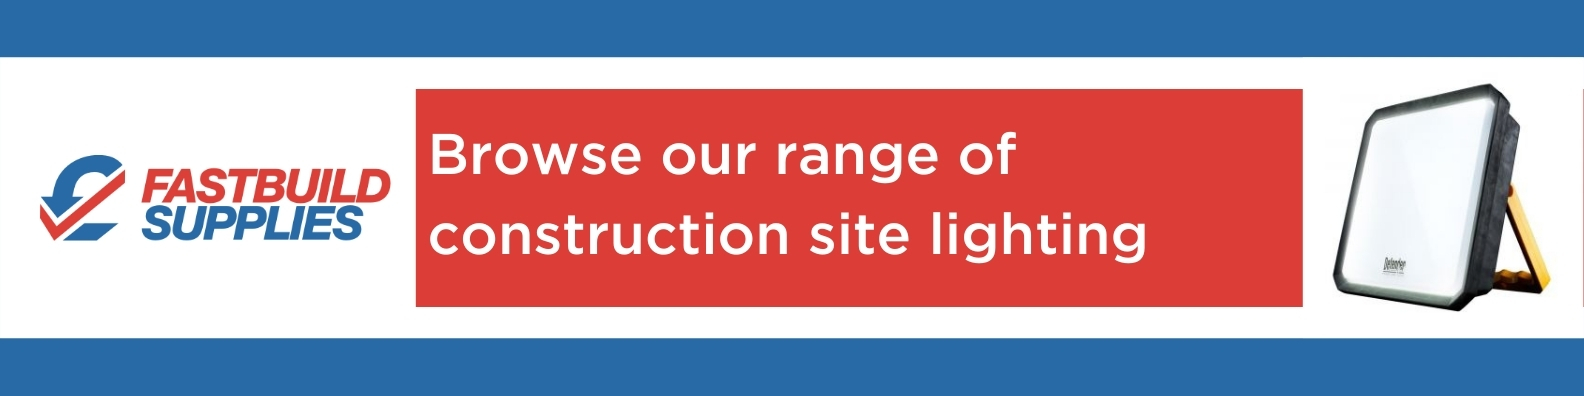 Browse our range of construction site lighting requirements